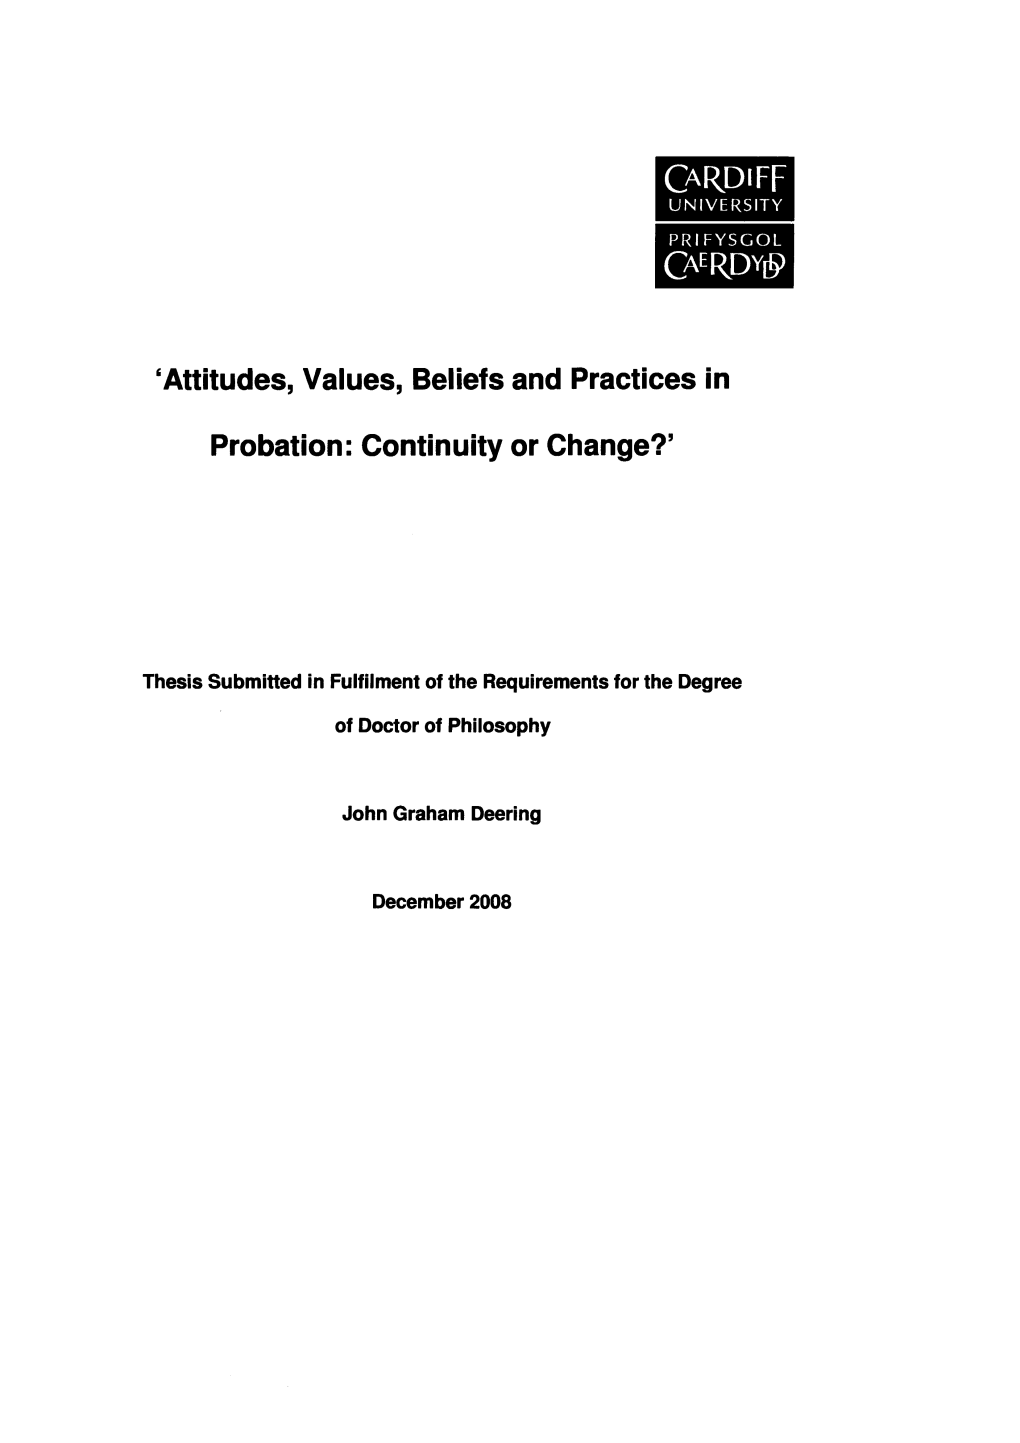 'Attitudes, Values, Beliefs and Practices in Probation: Continuity Or